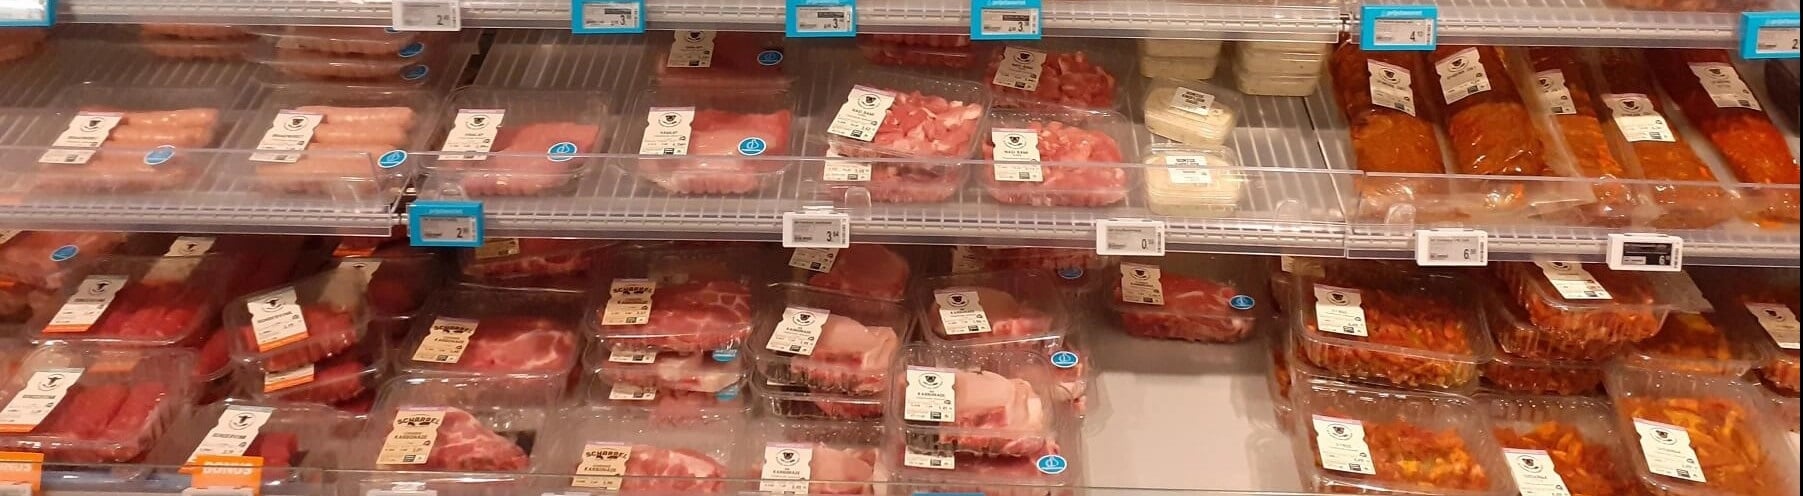 Meat products at a supermarket